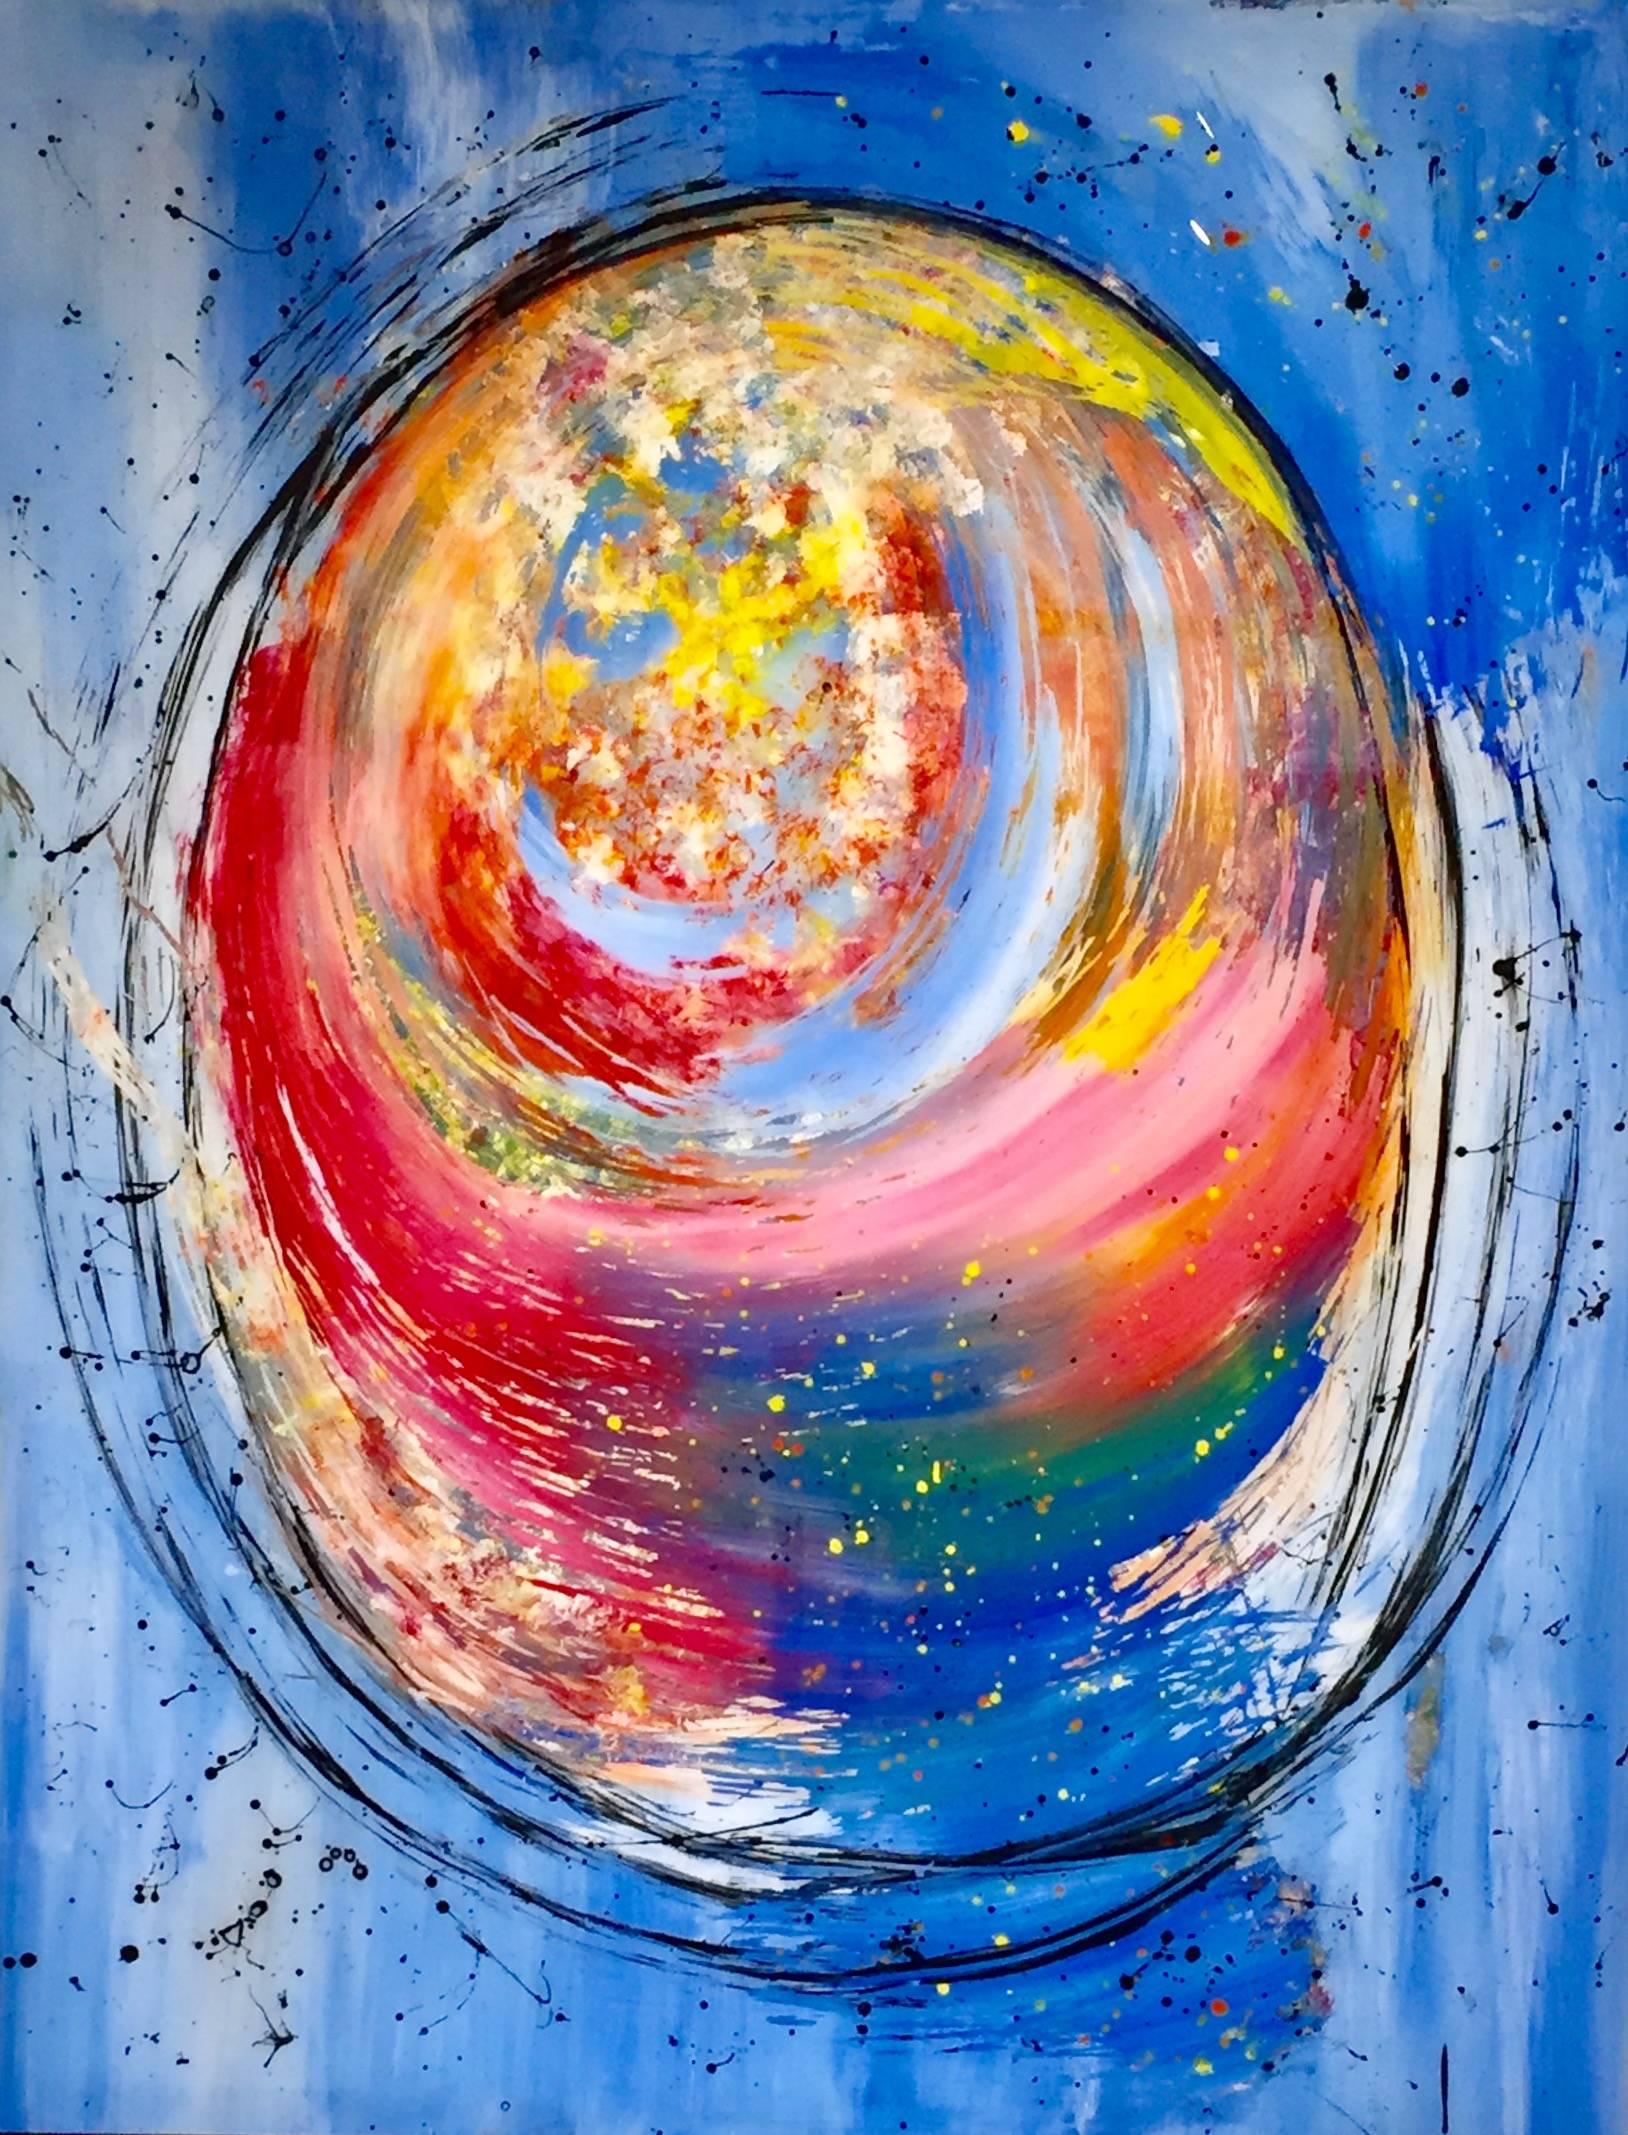 Arica Hilton Abstract Painting - MULTIVERSE I